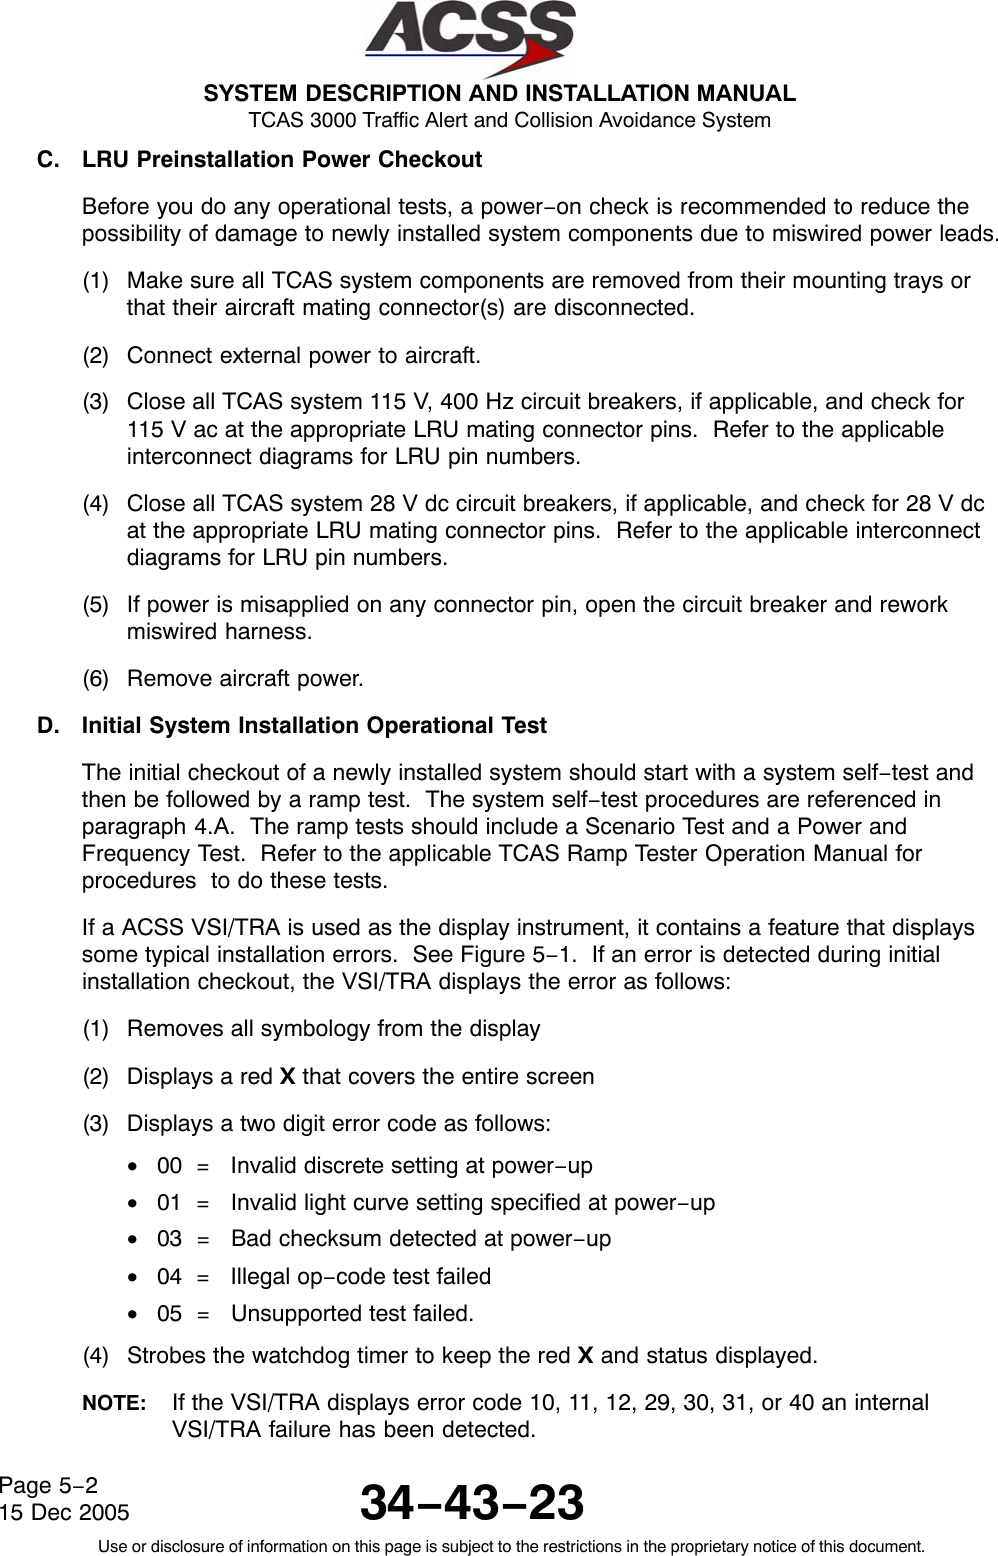  SYSTEM DESCRIPTION AND INSTALLATION MANUAL TCAS 3000 Traffic Alert and Collision Avoidance System34−43−23Use or disclosure of information on this page is subject to the restrictions in the proprietary notice of this document.Page 5−215 Dec 2005C. LRU Preinstallation Power CheckoutBefore you do any operational tests, a power−on check is recommended to reduce thepossibility of damage to newly installed system components due to miswired power leads.(1) Make sure all TCAS system components are removed from their mounting trays orthat their aircraft mating connector(s) are disconnected.(2) Connect external power to aircraft.(3) Close all TCAS system 115 V, 400 Hz circuit breakers, if applicable, and check for115 V ac at the appropriate LRU mating connector pins.  Refer to the applicableinterconnect diagrams for LRU pin numbers.(4) Close all TCAS system 28 V dc circuit breakers, if applicable, and check for 28 V dcat the appropriate LRU mating connector pins.  Refer to the applicable interconnectdiagrams for LRU pin numbers.(5) If power is misapplied on any connector pin, open the circuit breaker and reworkmiswired harness.(6) Remove aircraft power.D. Initial System Installation Operational TestThe initial checkout of a newly installed system should start with a system self−test andthen be followed by a ramp test.  The system self−test procedures are referenced inparagraph 4.A.  The ramp tests should include a Scenario Test and a Power andFrequency Test.  Refer to the applicable TCAS Ramp Tester Operation Manual forprocedures  to do these tests.If a ACSS VSI/TRA is used as the display instrument, it contains a feature that displayssome typical installation errors.  See Figure 5−1.  If an error is detected during initialinstallation checkout, the VSI/TRA displays the error as follows:(1) Removes all symbology from the display(2) Displays a red X that covers the entire screen(3) Displays a two digit error code as follows:•00  =   Invalid discrete setting at power−up•01  =   Invalid light curve setting specified at power−up•03  =   Bad checksum detected at power−up•04  =   Illegal op−code test failed•05  =   Unsupported test failed.(4) Strobes the watchdog timer to keep the red X and status displayed.NOTE: If the VSI/TRA displays error code 10, 11, 12, 29, 30, 31, or 40 an internalVSI/TRA failure has been detected.